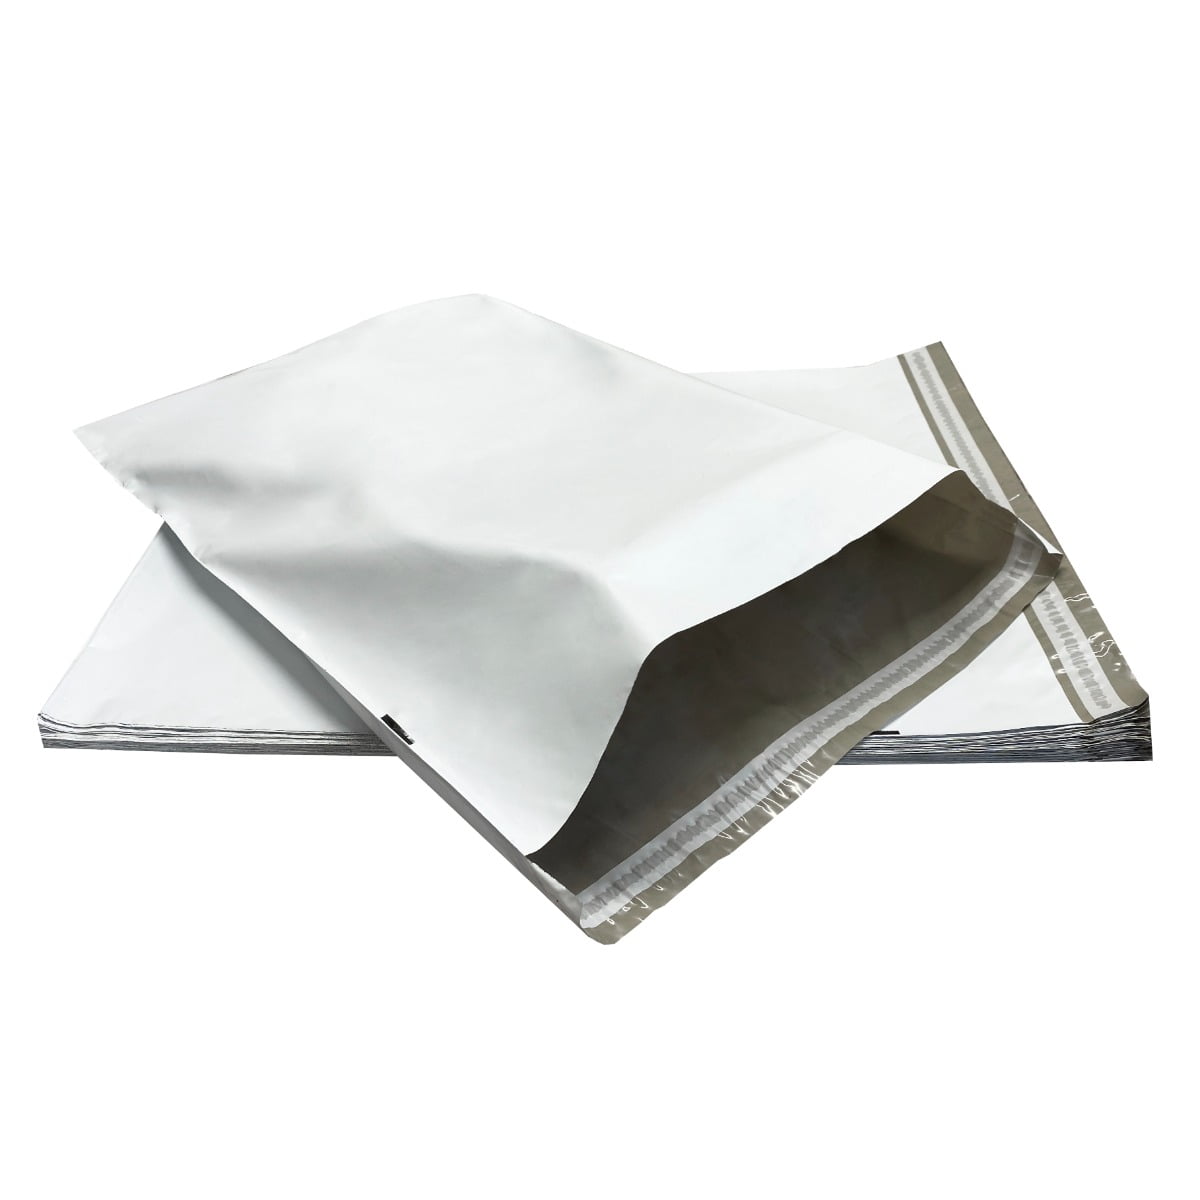 12 x 15 #6 Self Seal Tear Proof Poly Bubble Mailers Shipping Bags 100 50 25 20 